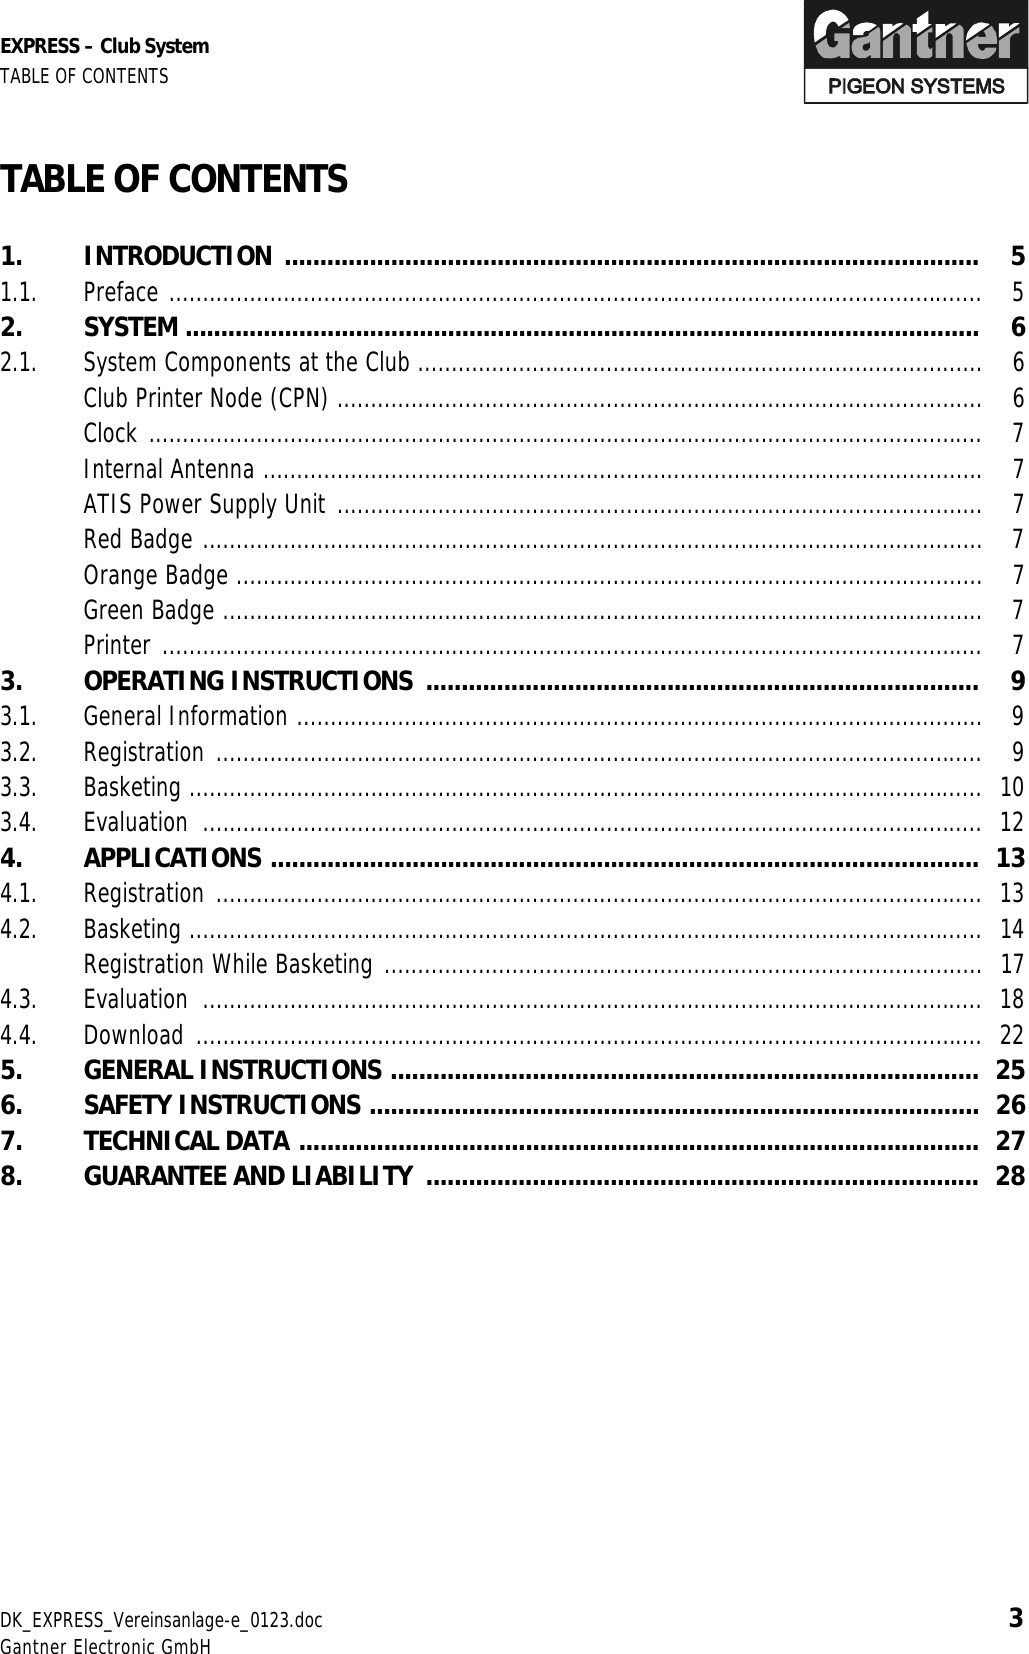 EXPRESS – Club System TABLE OF CONTENTS DK_EXPRESS_Vereinsanlage-e_0123.doc 3 Gantner Electronic GmbH TABLE OF CONTENTS   1. INTRODUCTION ..................................................................................................  5 1.1. Preface ......................................................................................................................... 5 2. SYSTEM ................................................................................................................   6 2.1.  System Components at the Club ....................................................................................  6   Club Printer Node (CPN) ................................................................................................  6  Clock ............................................................................................................................ 7  Internal Antenna ........................................................................................................... 7   ATIS Power Supply Unit ................................................................................................  7  Red Badge .................................................................................................................... 7  Orange Badge ............................................................................................................... 7  Green Badge ................................................................................................................. 7  Printer .......................................................................................................................... 7 3. OPERATING INSTRUCTIONS ..............................................................................  9 3.1. General Information ...................................................................................................... 9 3.2. Registration .................................................................................................................. 9 3.3. Basketing ...................................................................................................................... 10 3.4. Evaluation .................................................................................................................... 12 4. APPLICATIONS ....................................................................................................  13 4.1. Registration .................................................................................................................. 13 4.2. Basketing ...................................................................................................................... 14   Registration While Basketing .........................................................................................  17 4.3. Evaluation .................................................................................................................... 18 4.4. Download ..................................................................................................................... 22 5. GENERAL INSTRUCTIONS ...................................................................................  25 6. SAFETY INSTRUCTIONS ......................................................................................  26 7. TECHNICAL DATA ................................................................................................  27 8.  GUARANTEE AND LIABILITY  ..............................................................................  28   